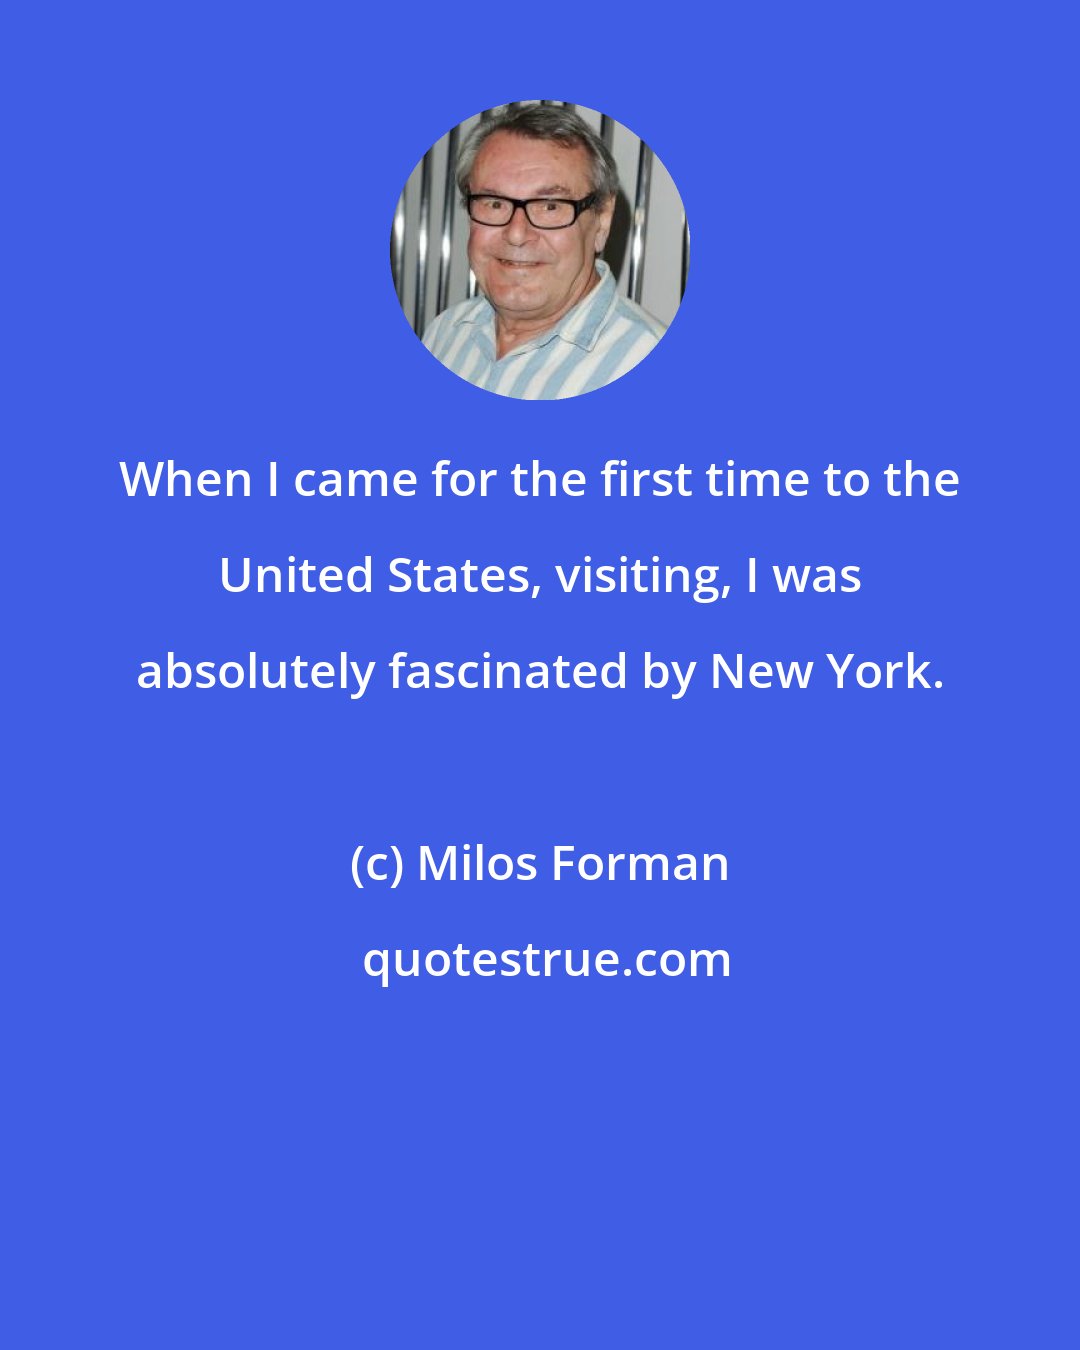 Milos Forman: When I came for the first time to the United States, visiting, I was absolutely fascinated by New York.